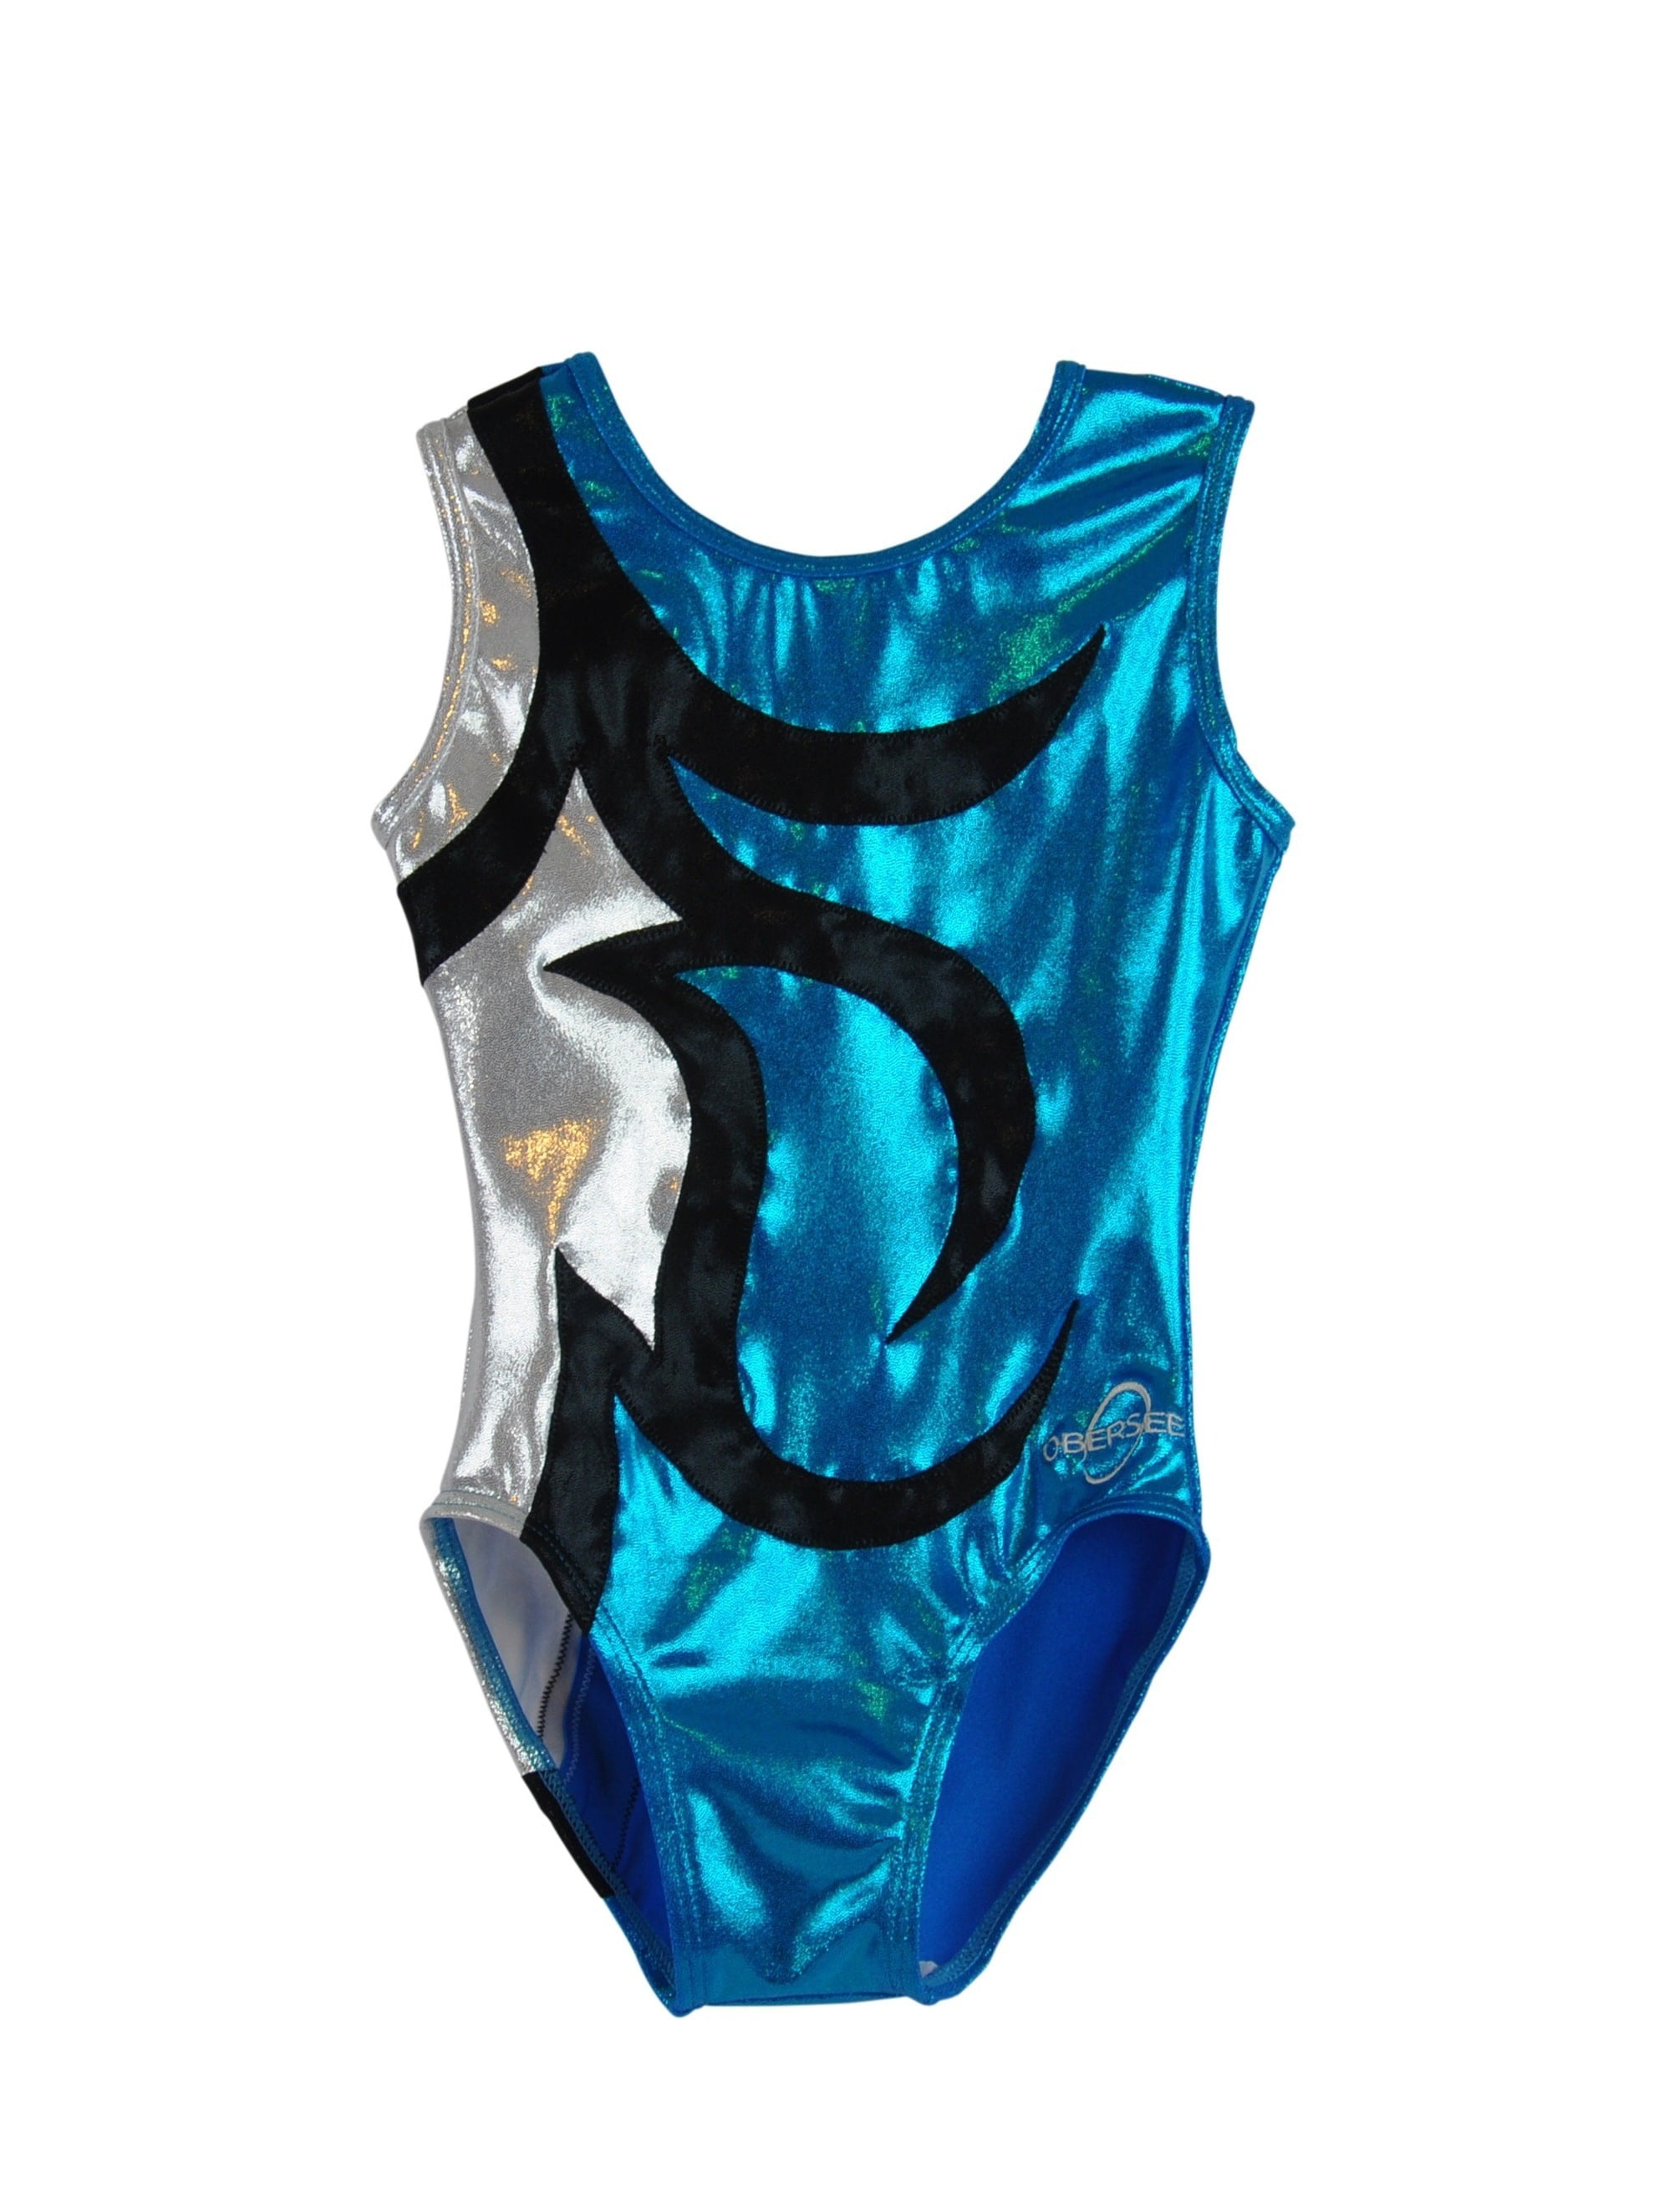 New girls gymnastic leotard metallic turquoise with silver top 